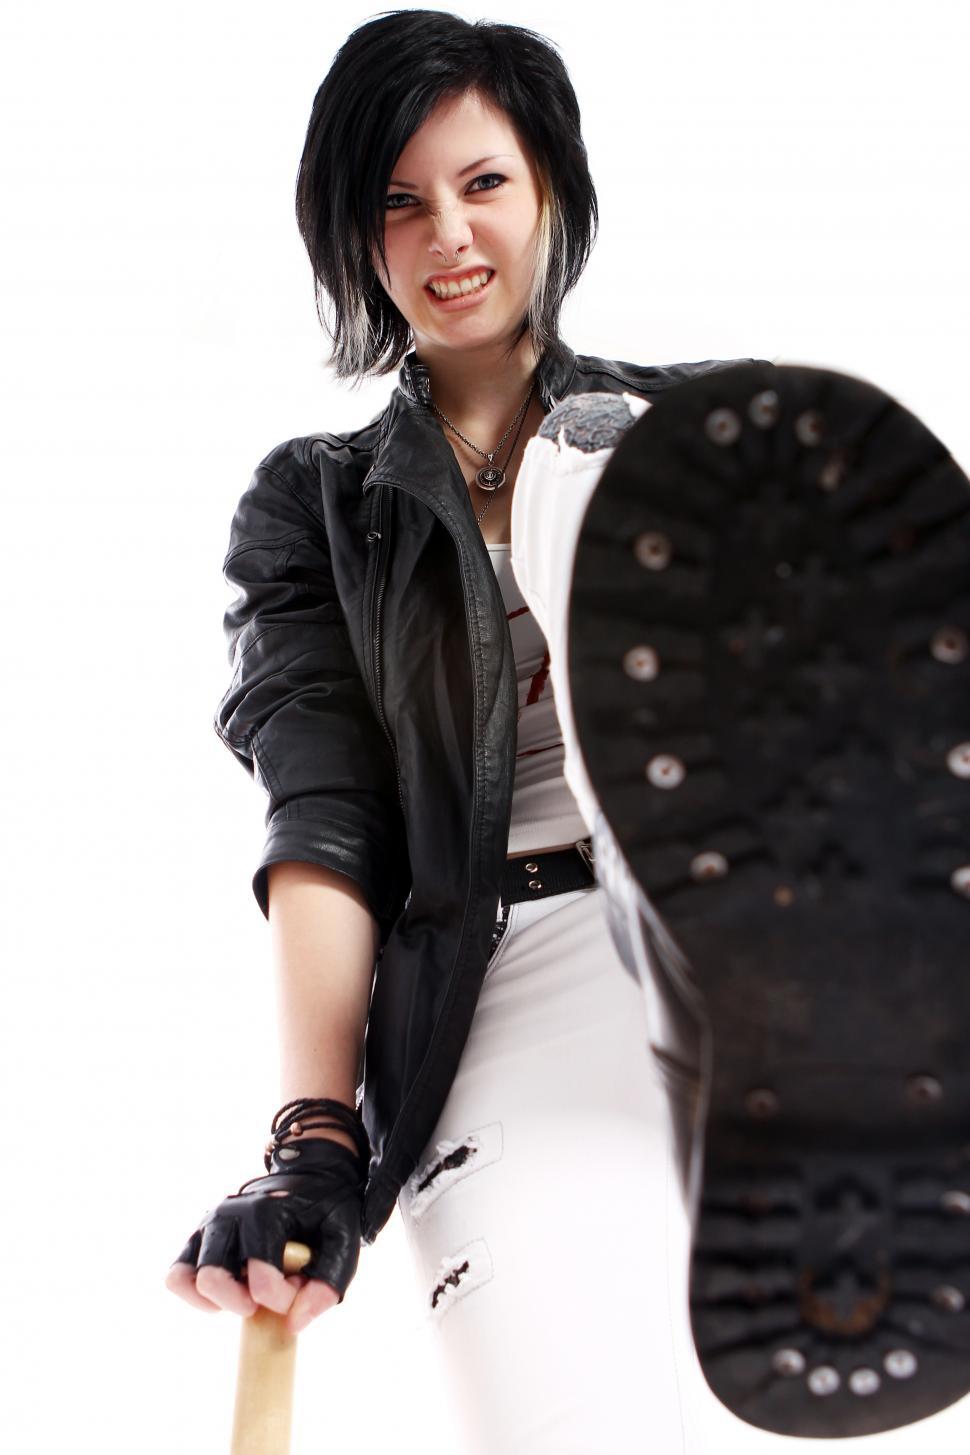 Free Image of Young punk girl stomping 